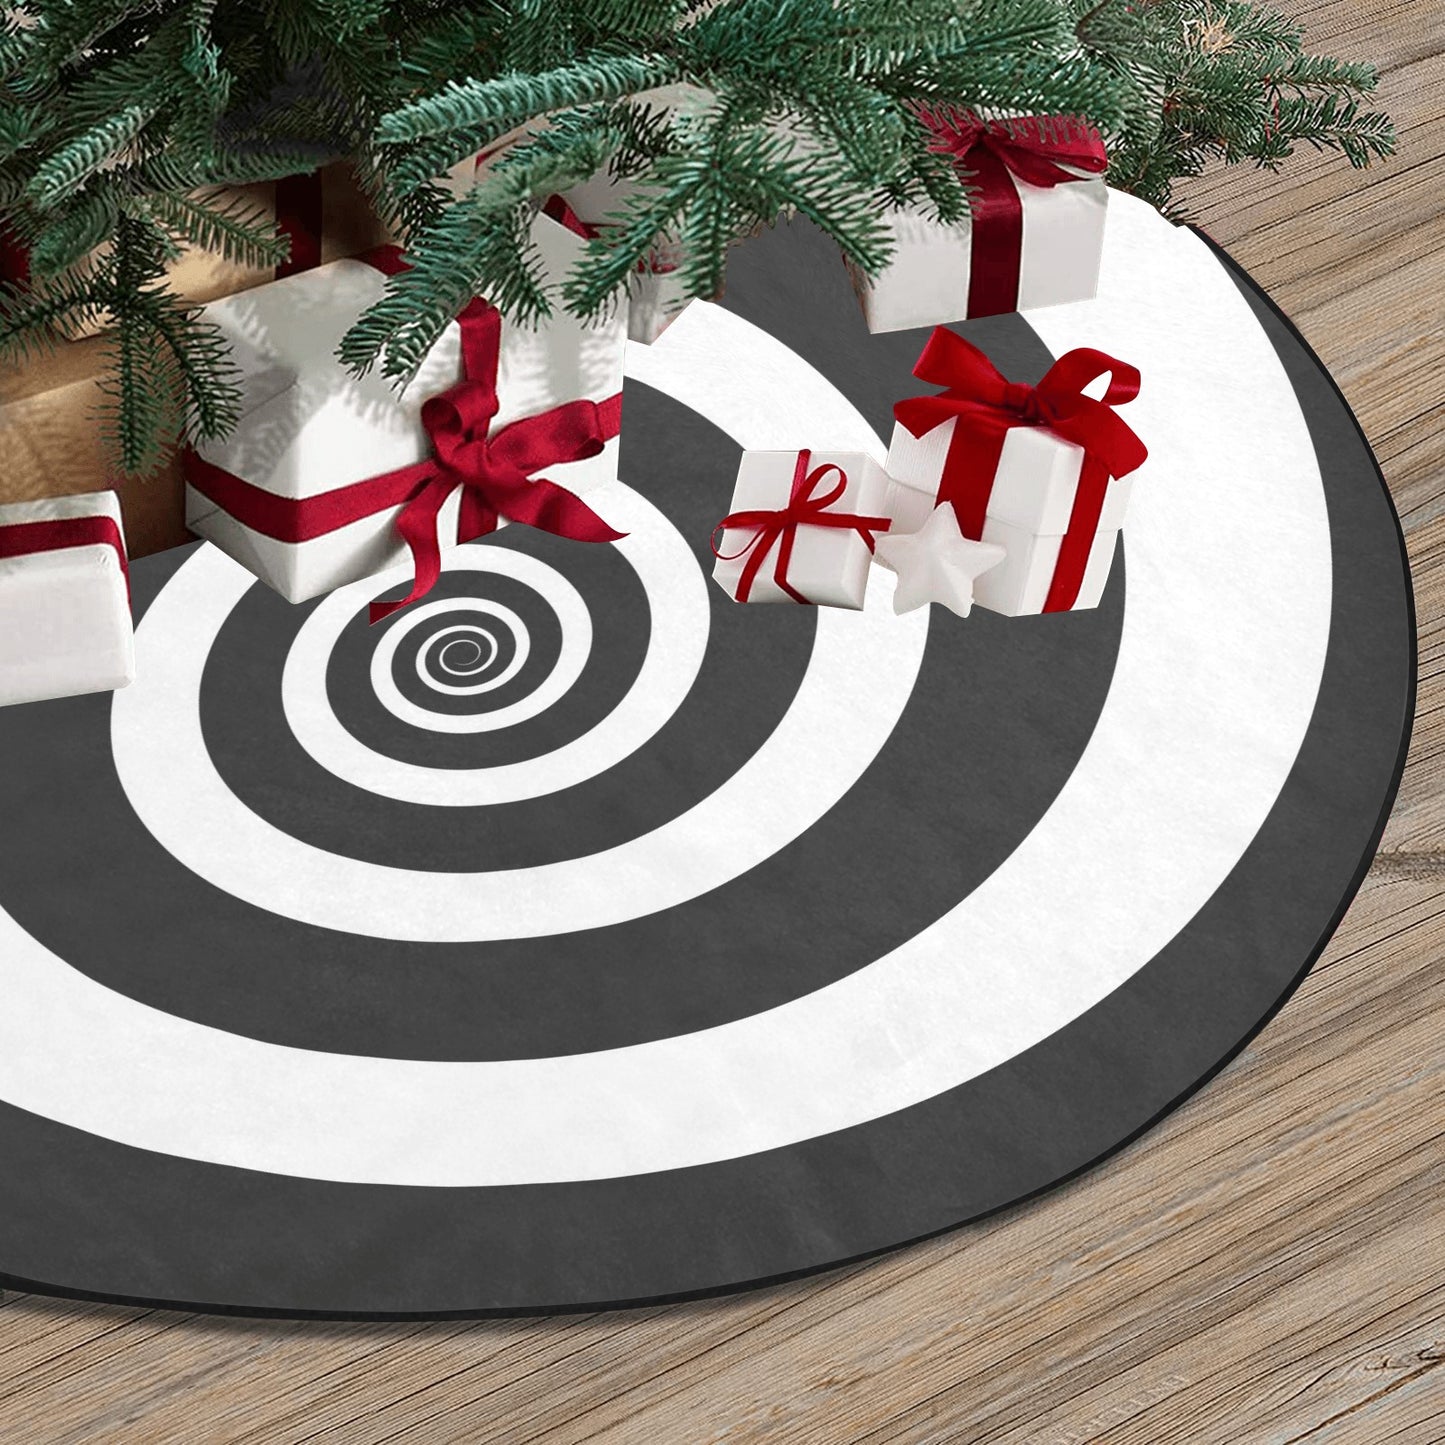 Halloween Tree Skirt, Hypnotic Spiral Black White Christmas Small Large Cover Home Decor Decoration Witch Gothic Creepy Spooky Party Starcove Fashion